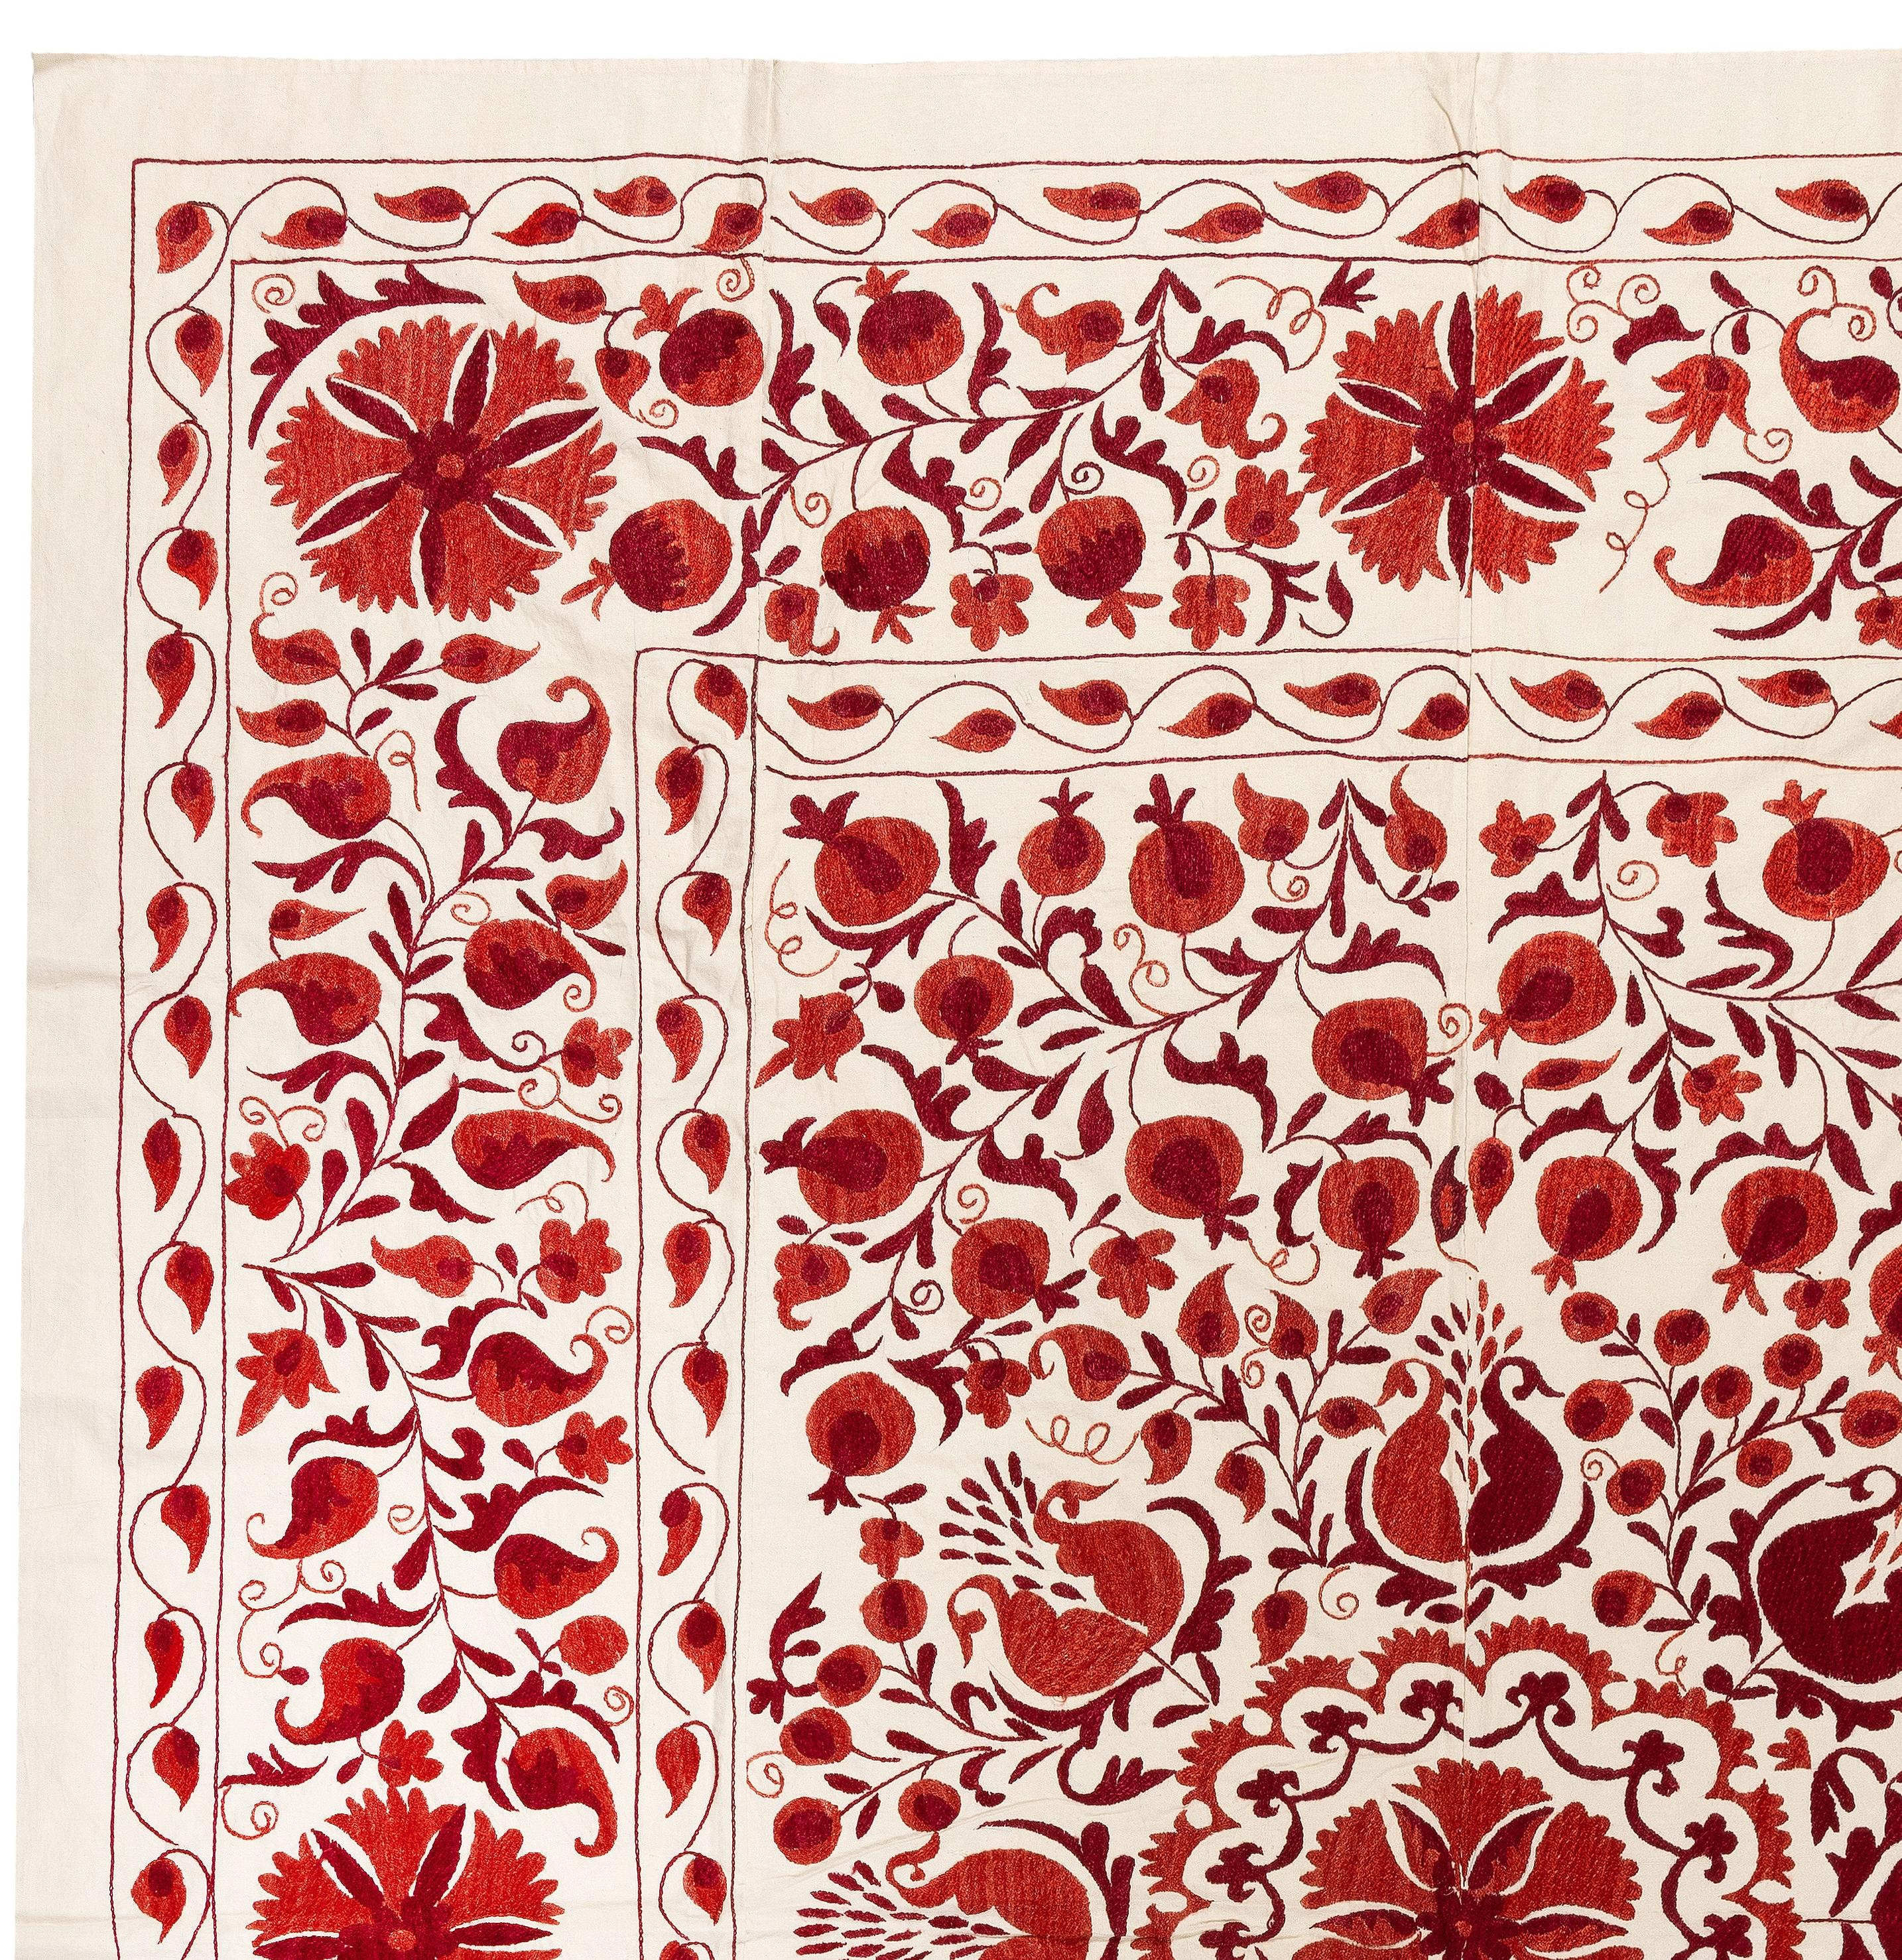 Suzani 6.5x8 Ft Silk Wall Hanging in Red & Cream, Embroidered Bedspread, New Tablecloth For Sale